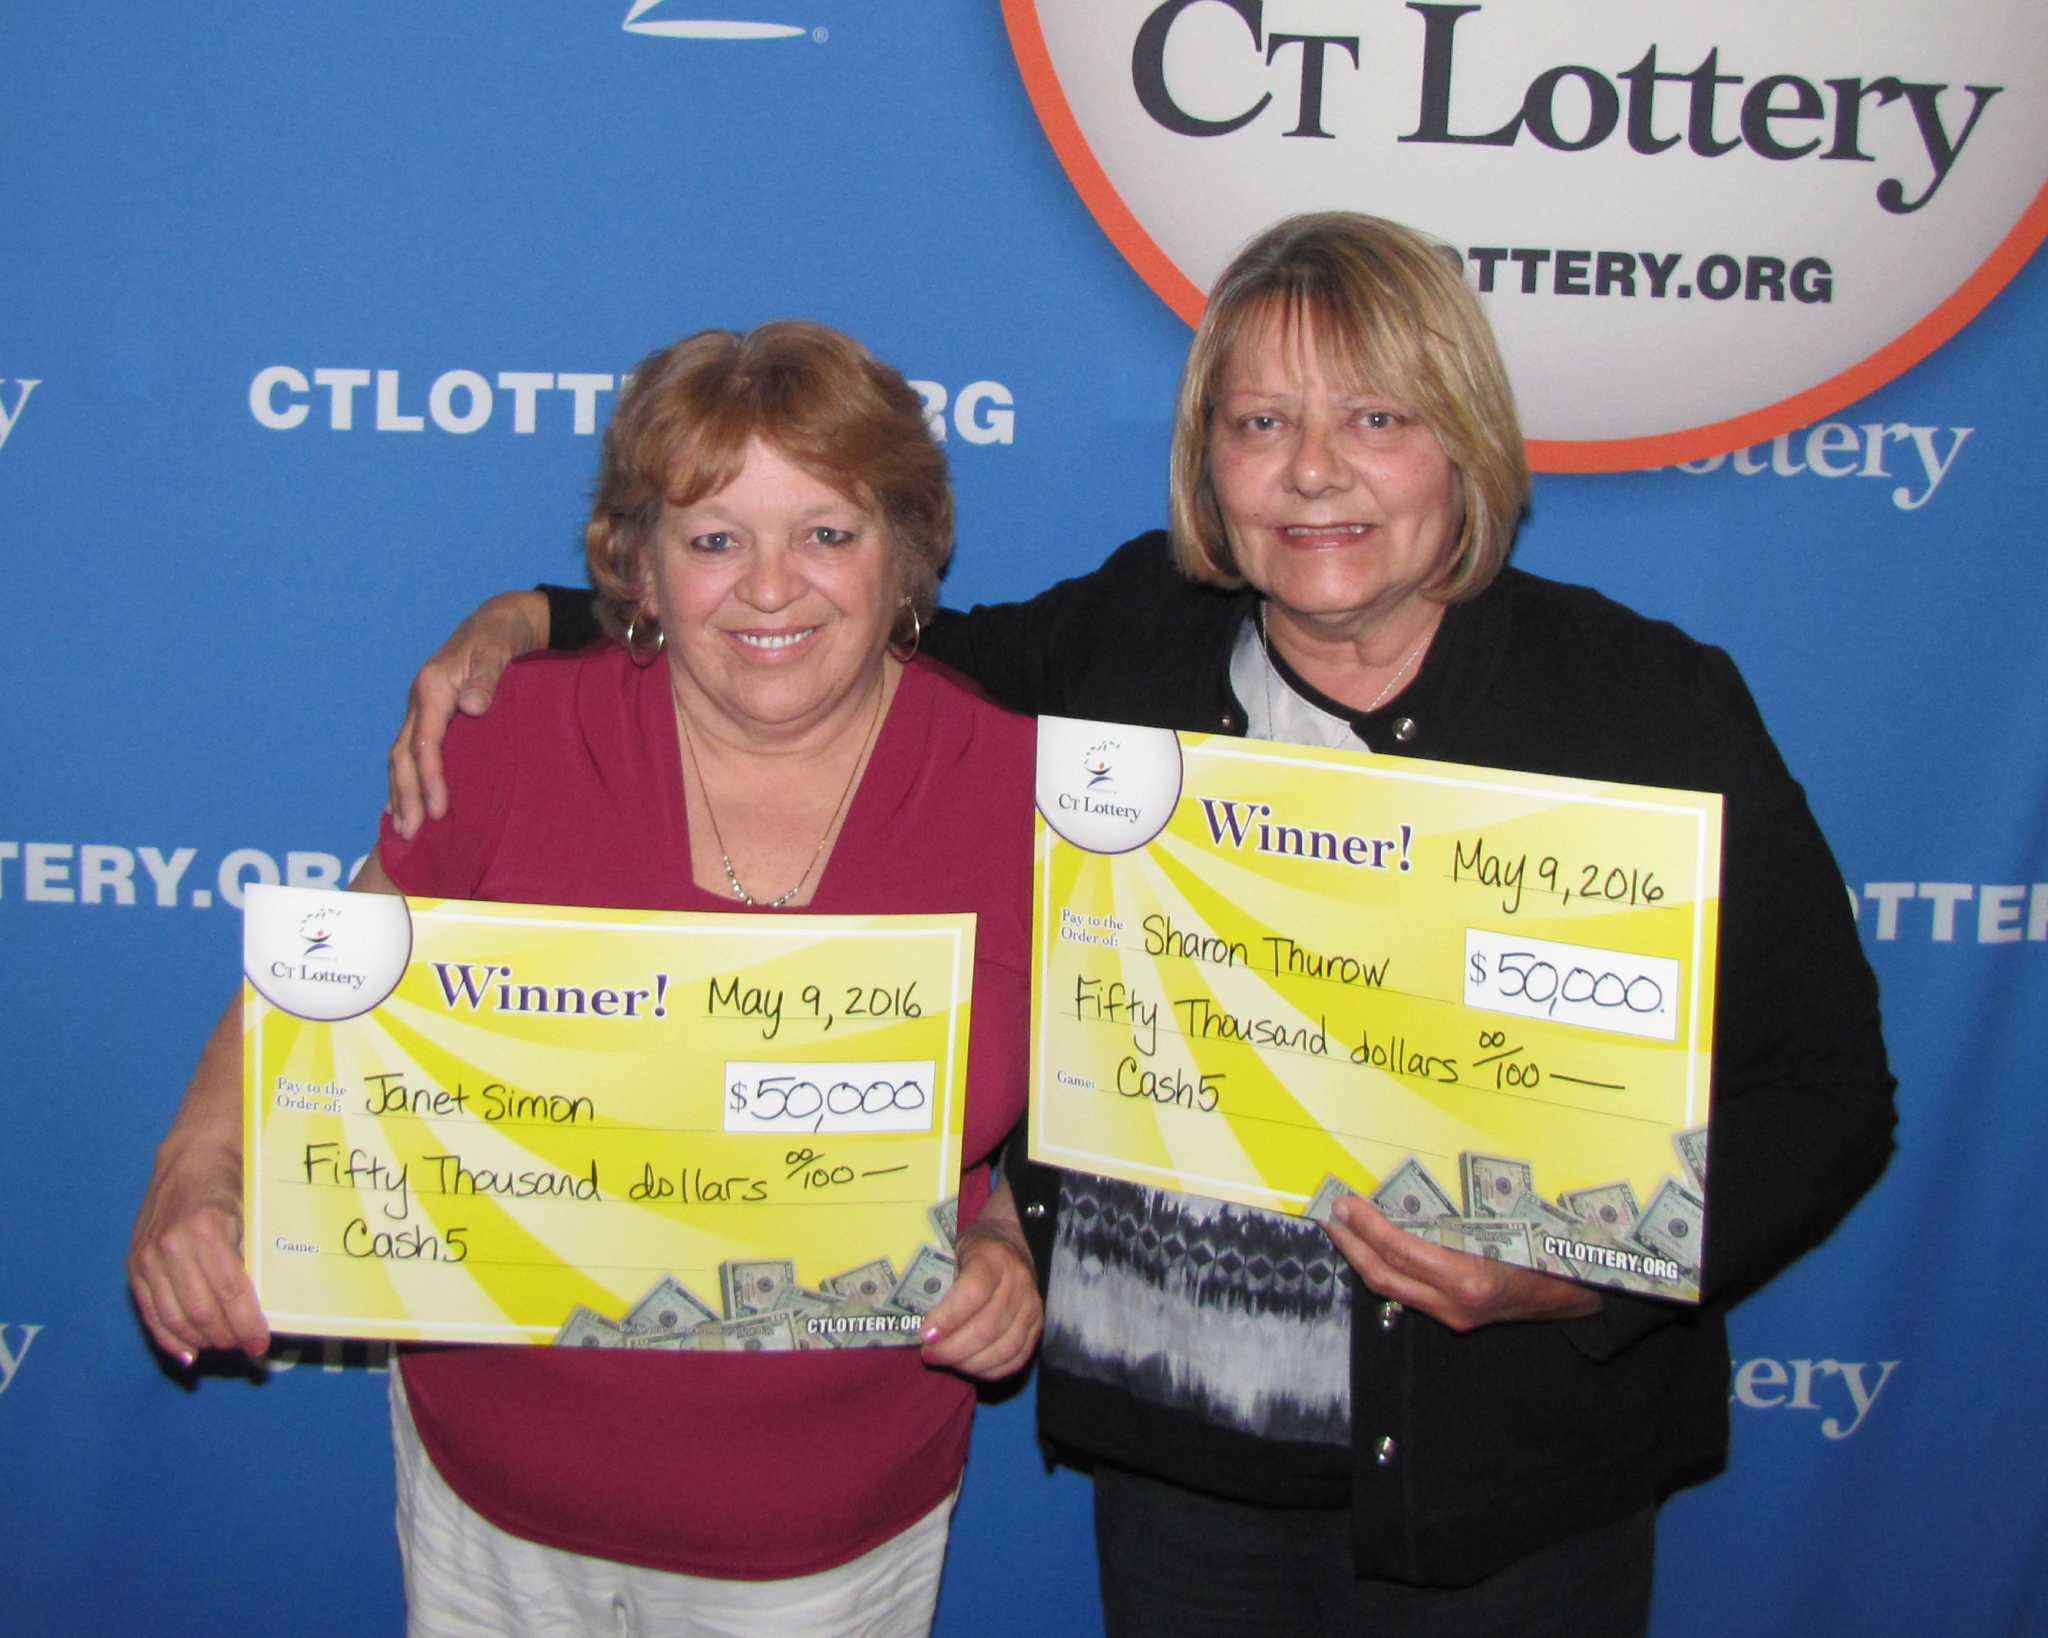 Winners tell lucky stories on hitting the lottery